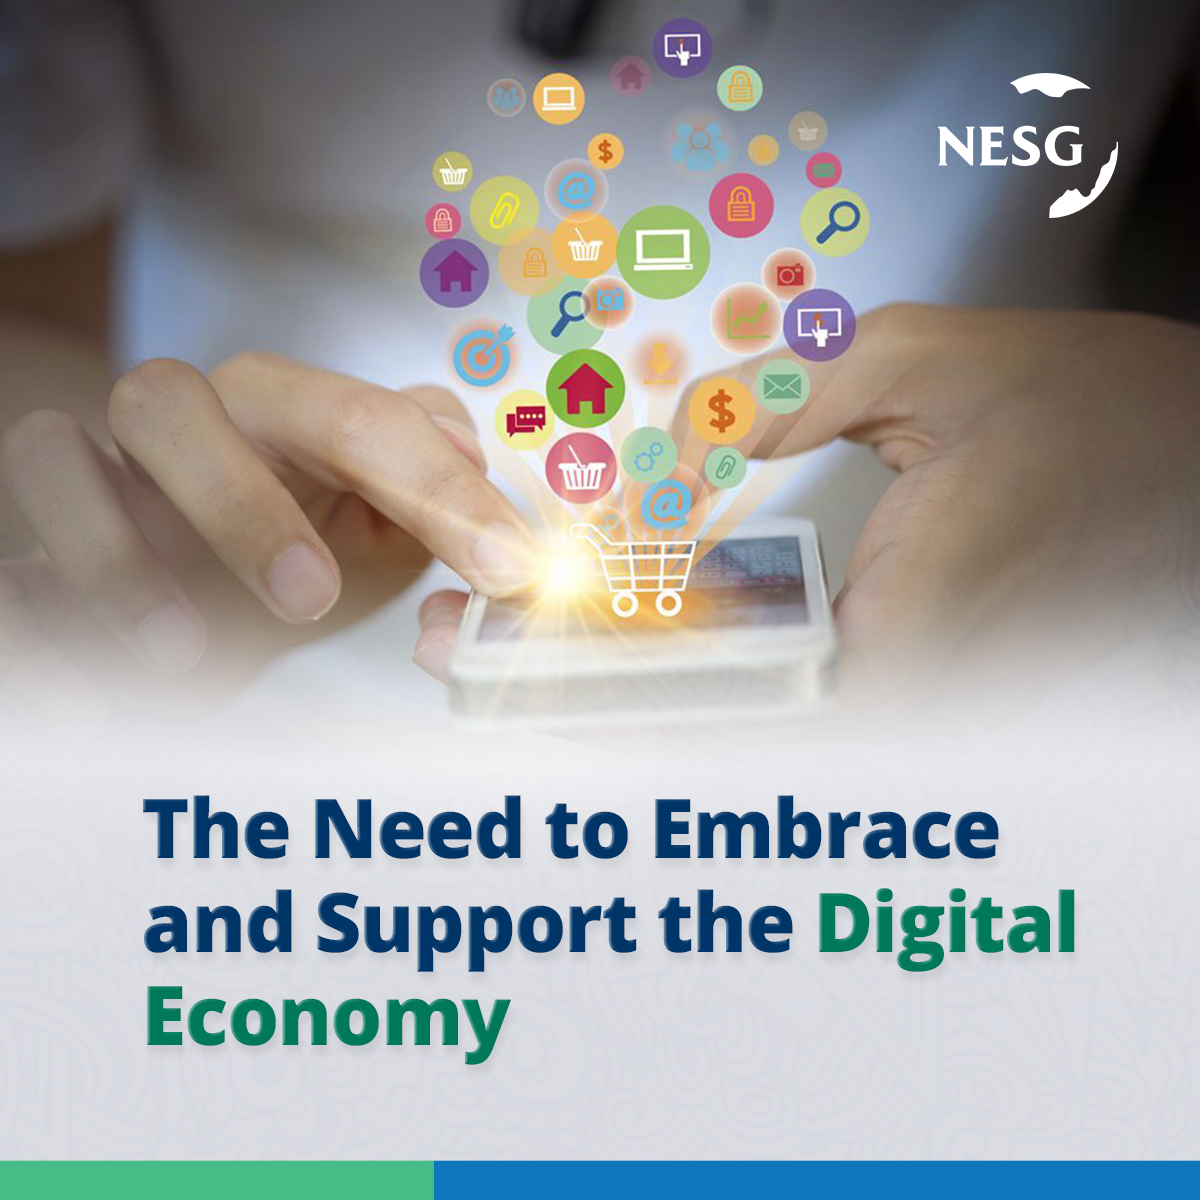 The Need to Embrace and Support the Digital Economy